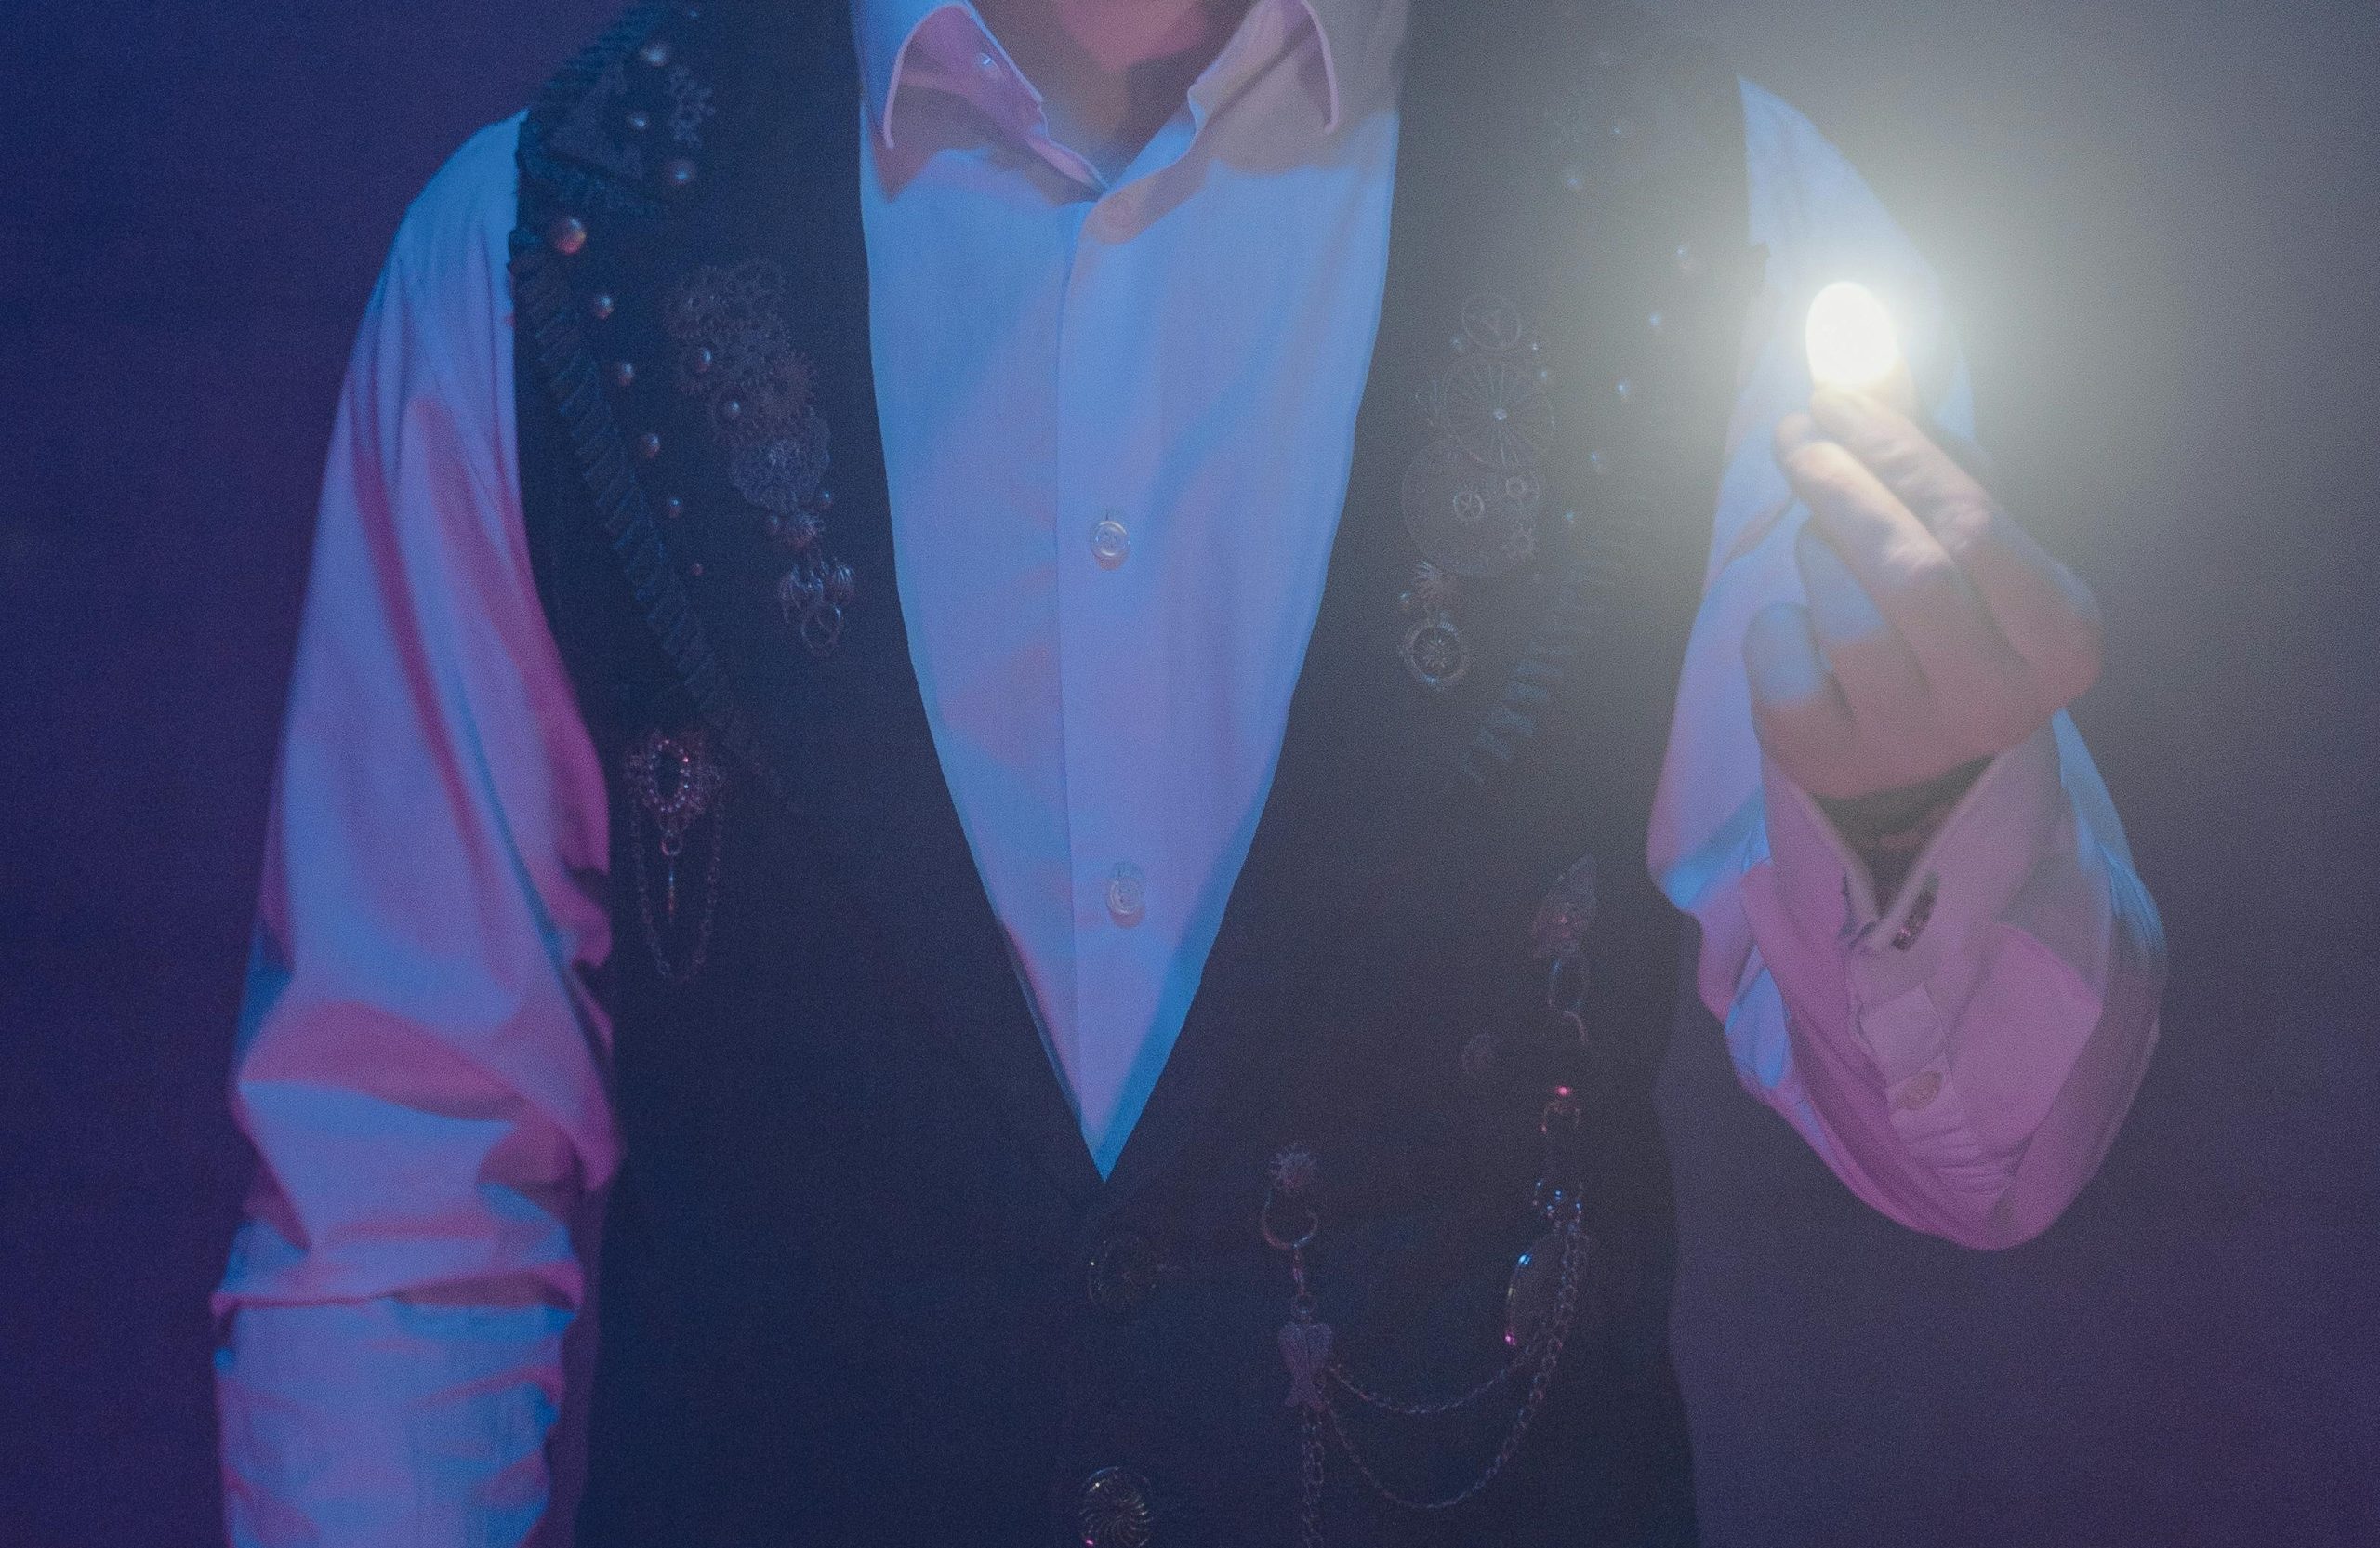 torso of man in white shirt and black vest holding light in his fingers